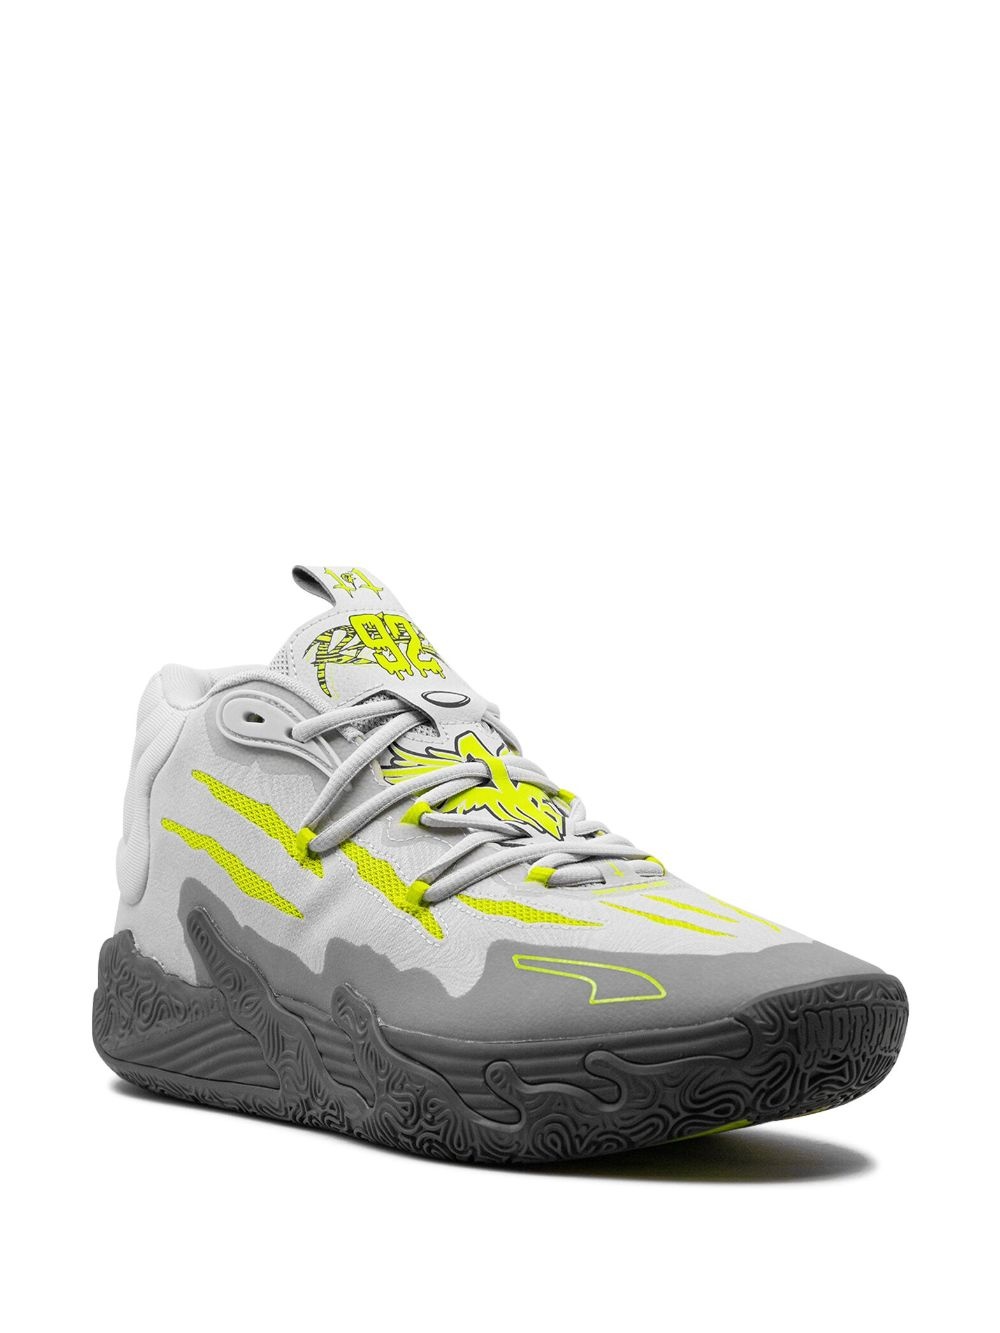 x LaMelo Ball MB.03 "Chino Hills" sneakers - 2